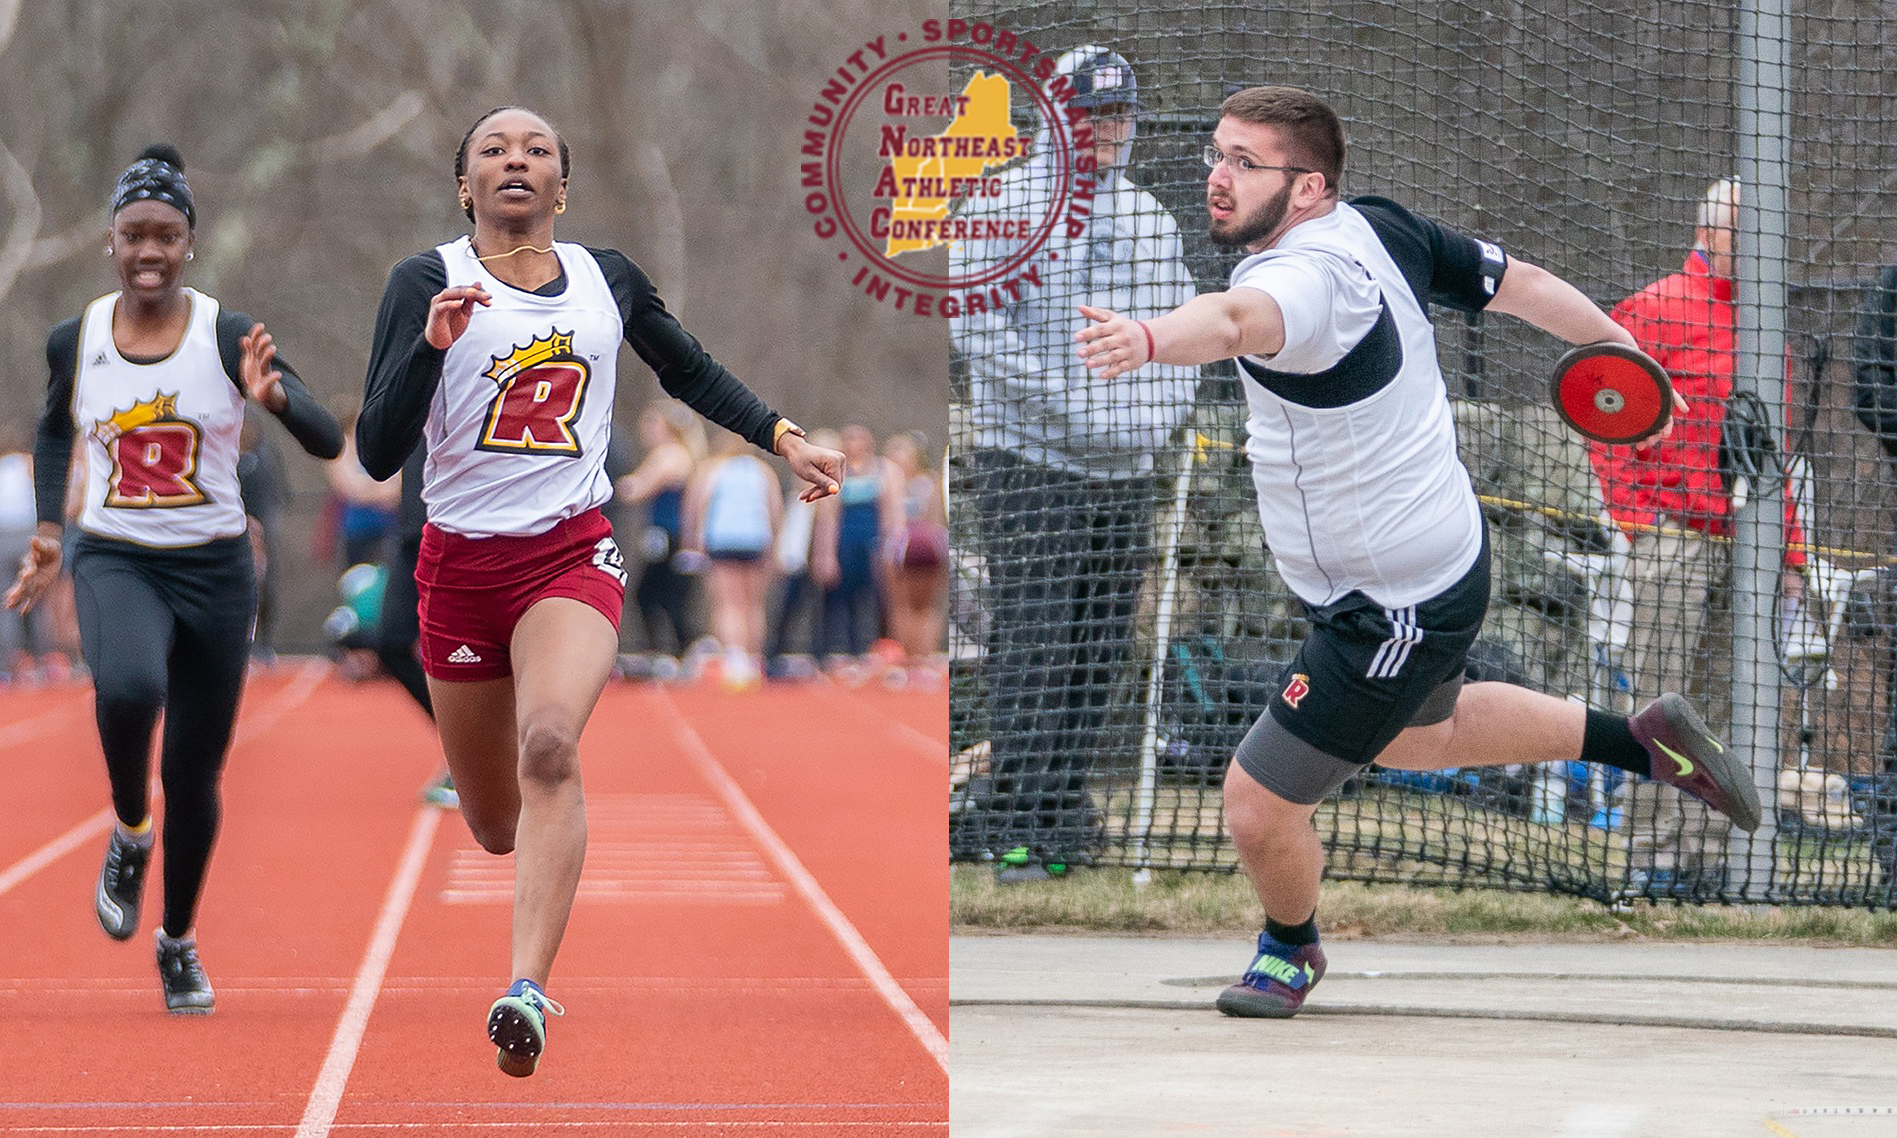 Anderson, St. Hilaire Earn GNAC Weekly Honors